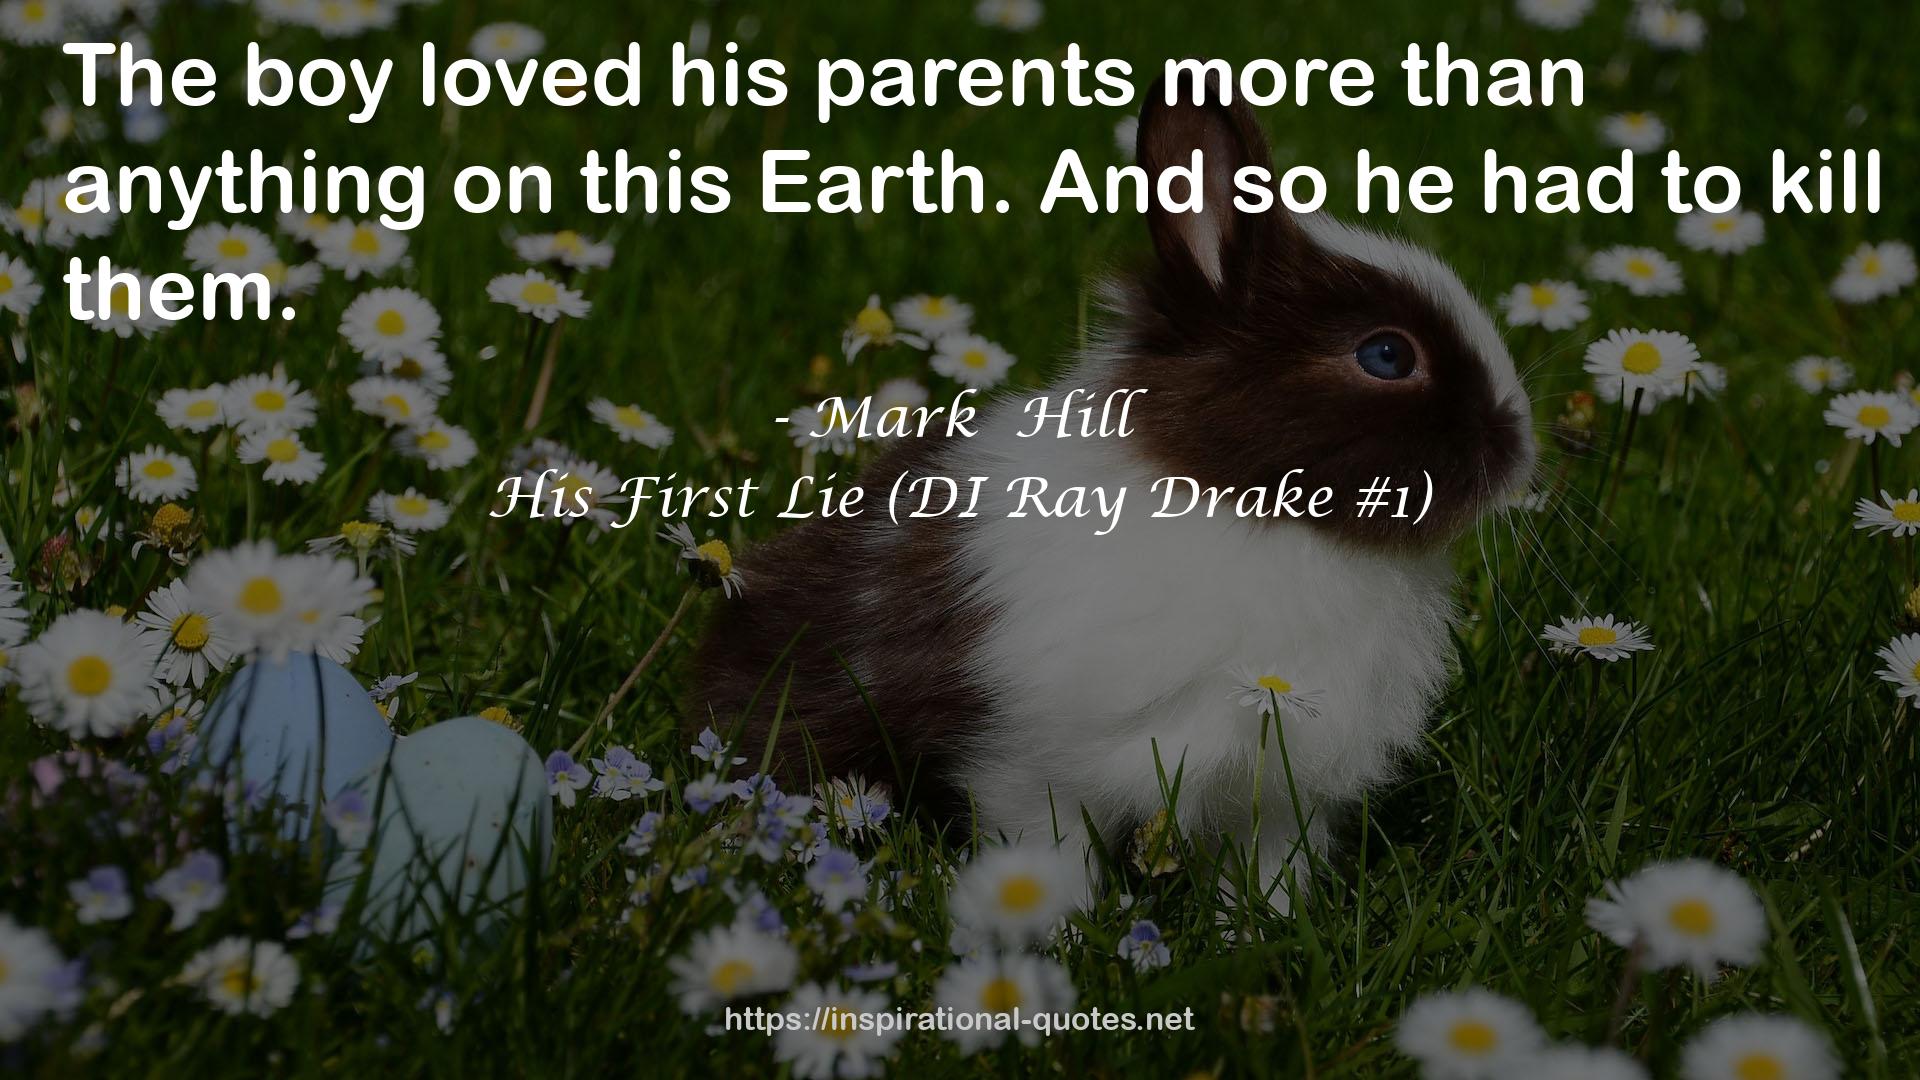 His First Lie (DI Ray Drake #1) QUOTES